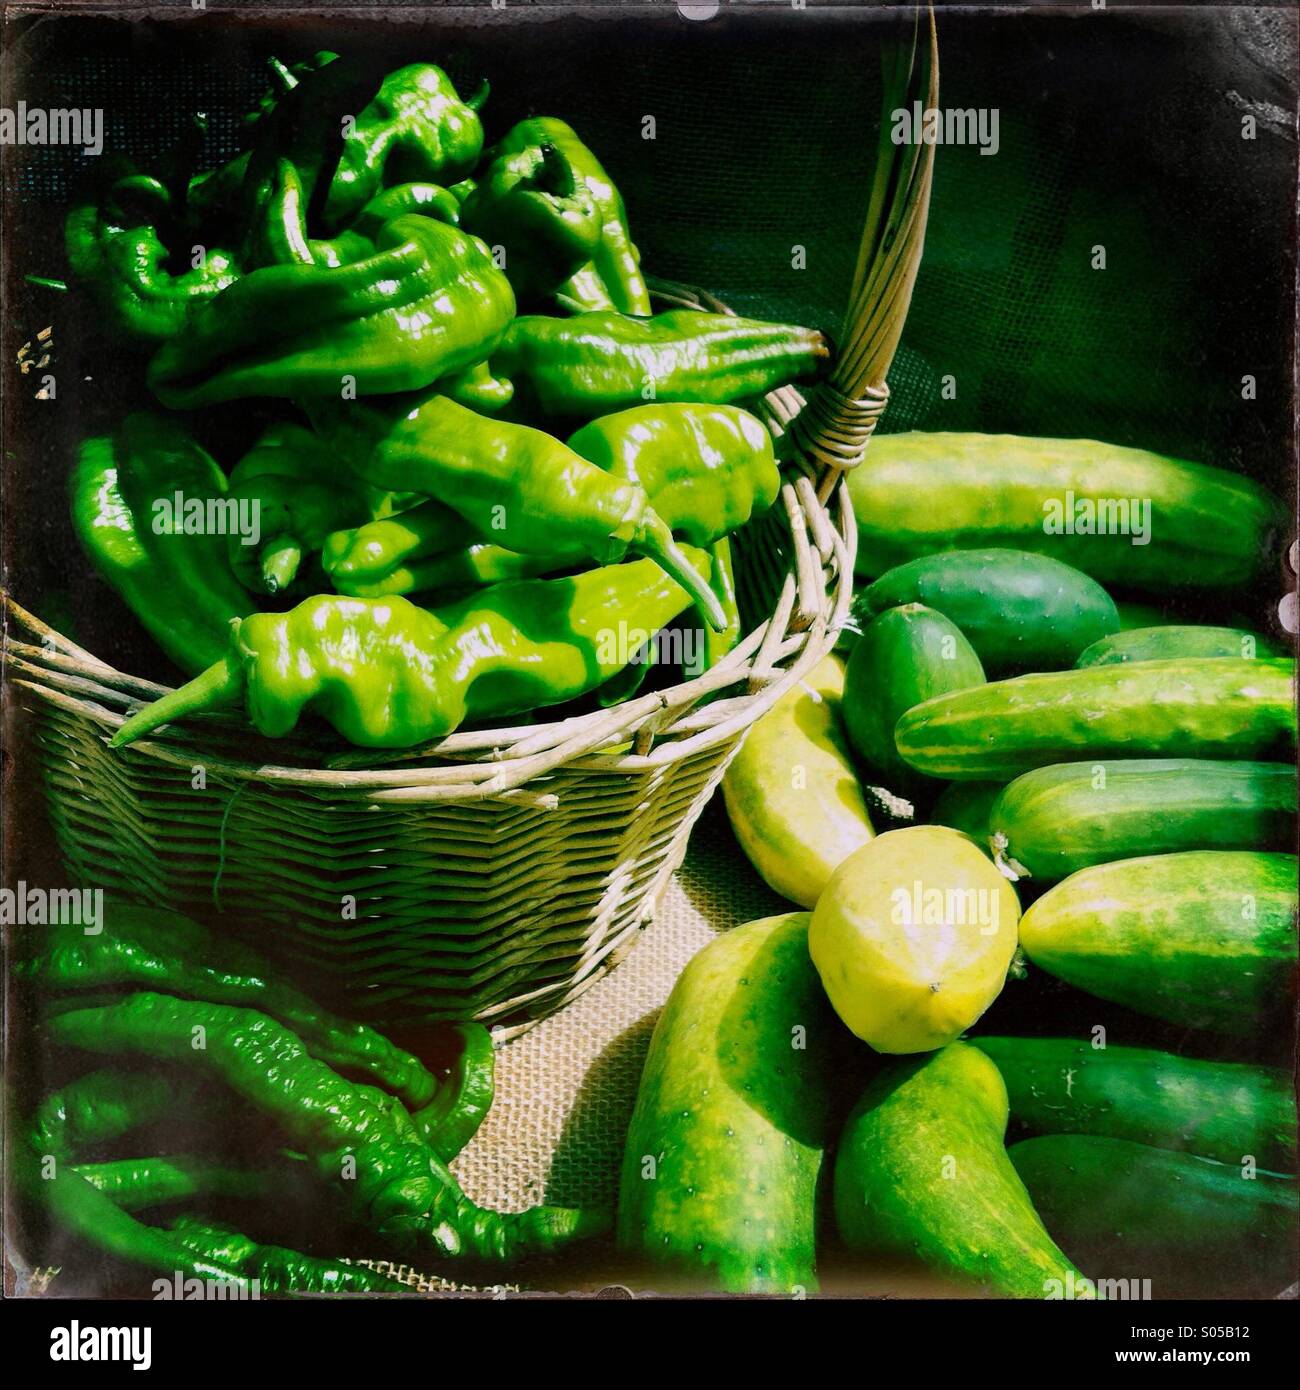 Basket of green peppers with Spanish cucumbers Stock Photo